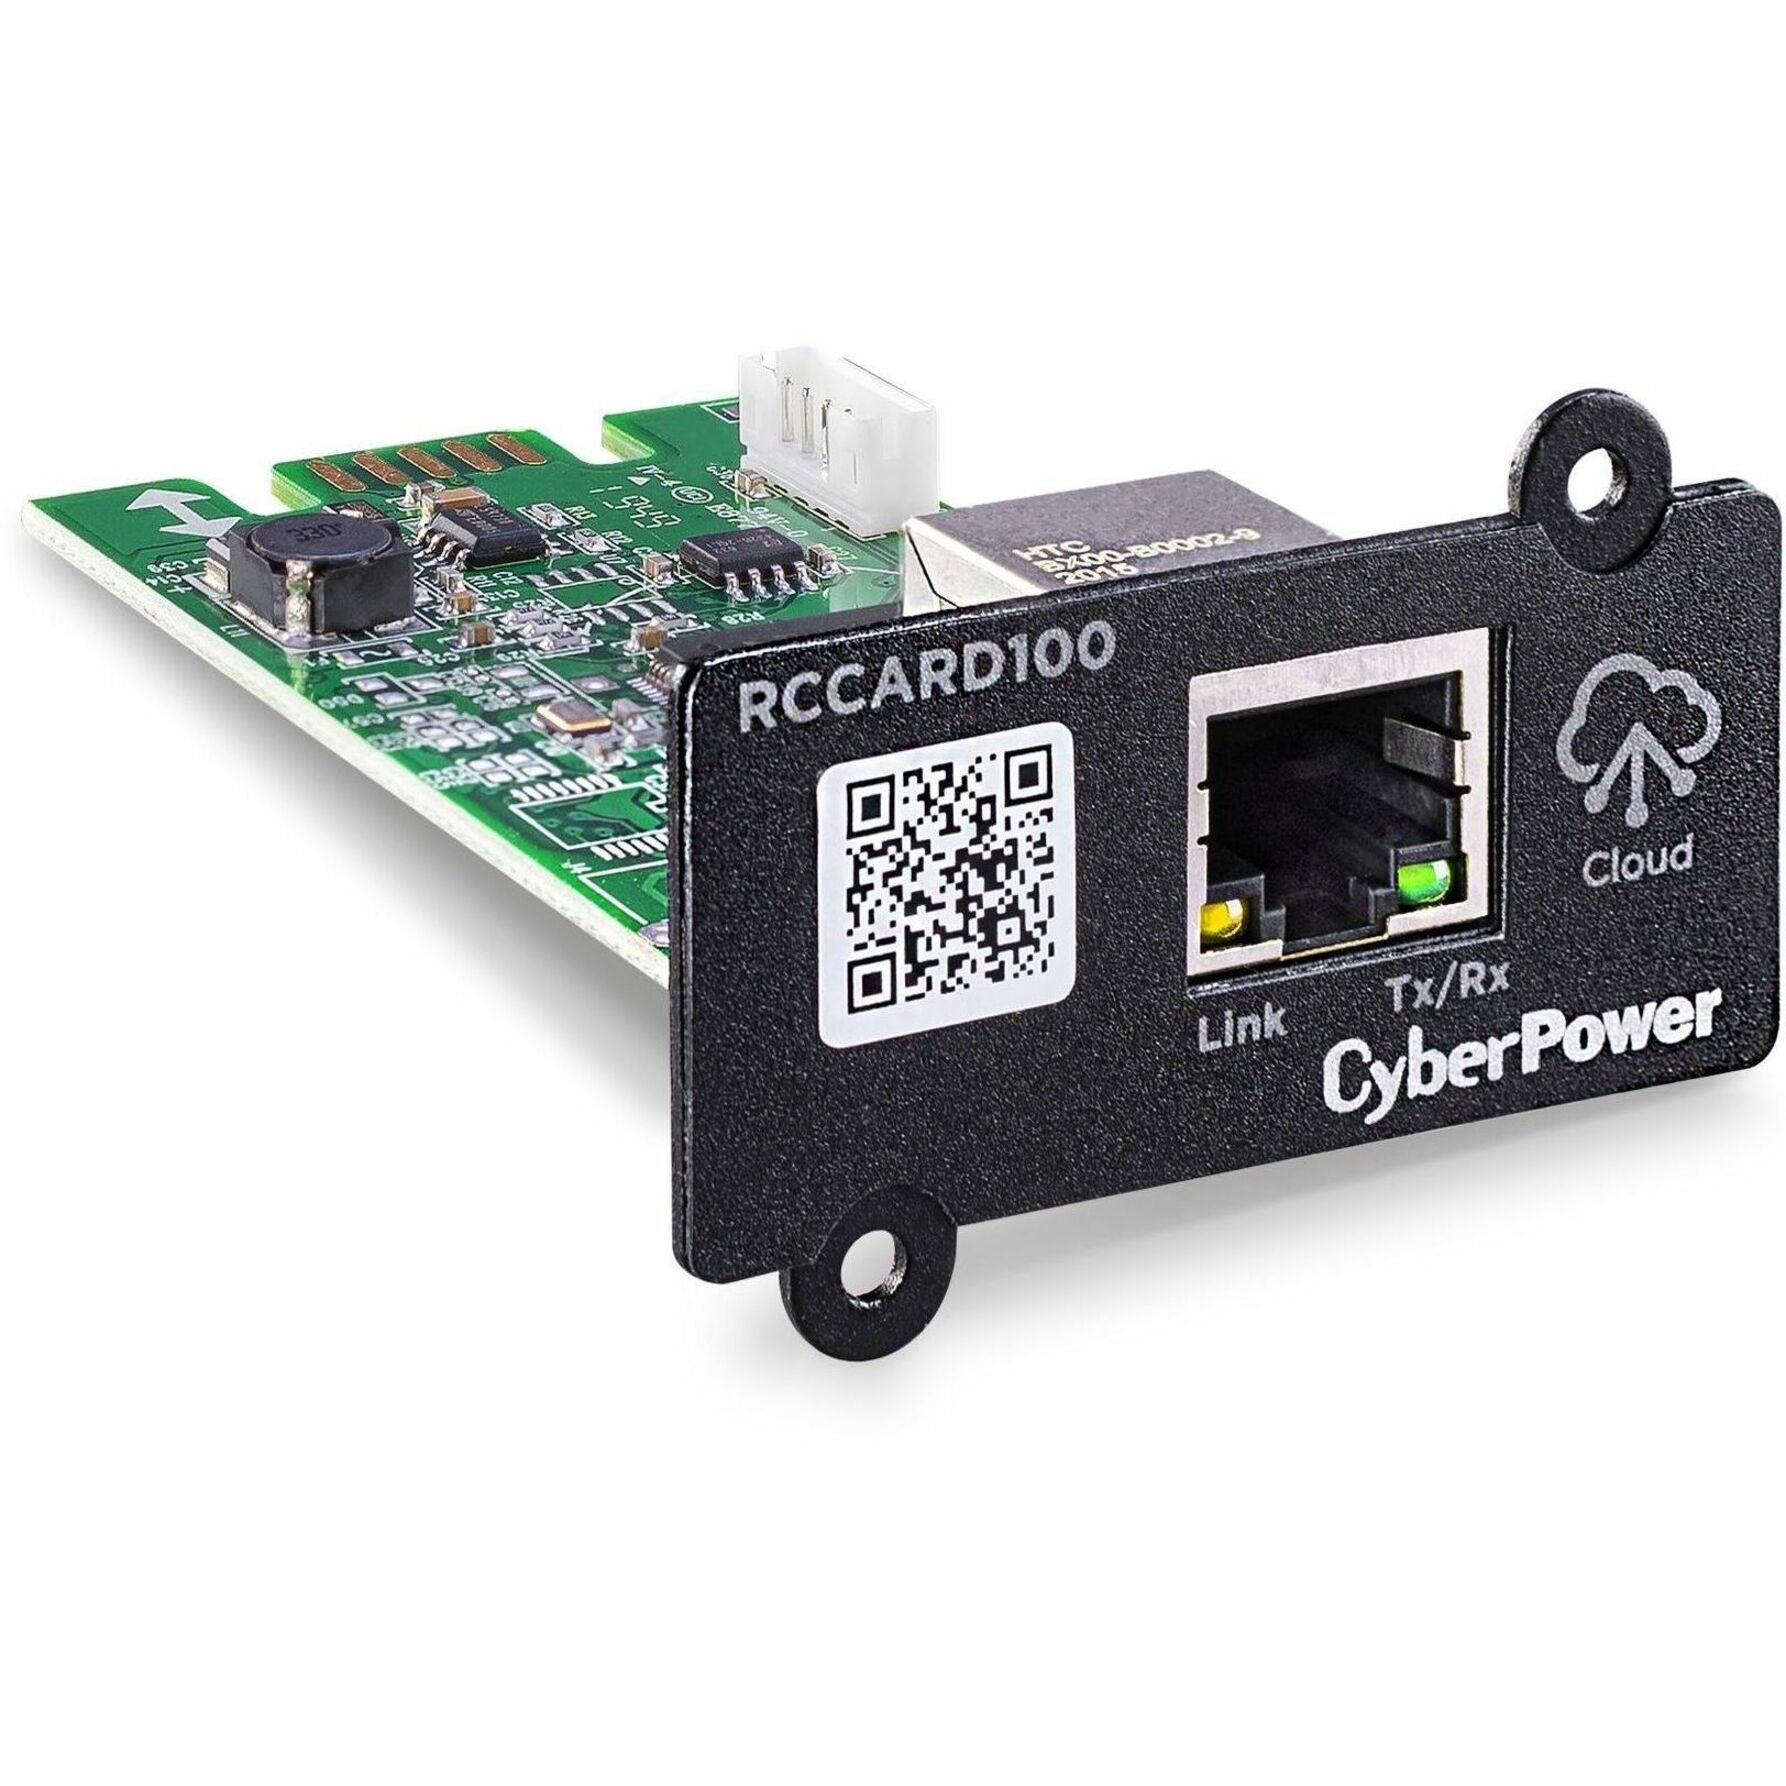 CyberPower RCCARD100 Convenient Remote Power Management For UPS, Cloud Monitoring Card